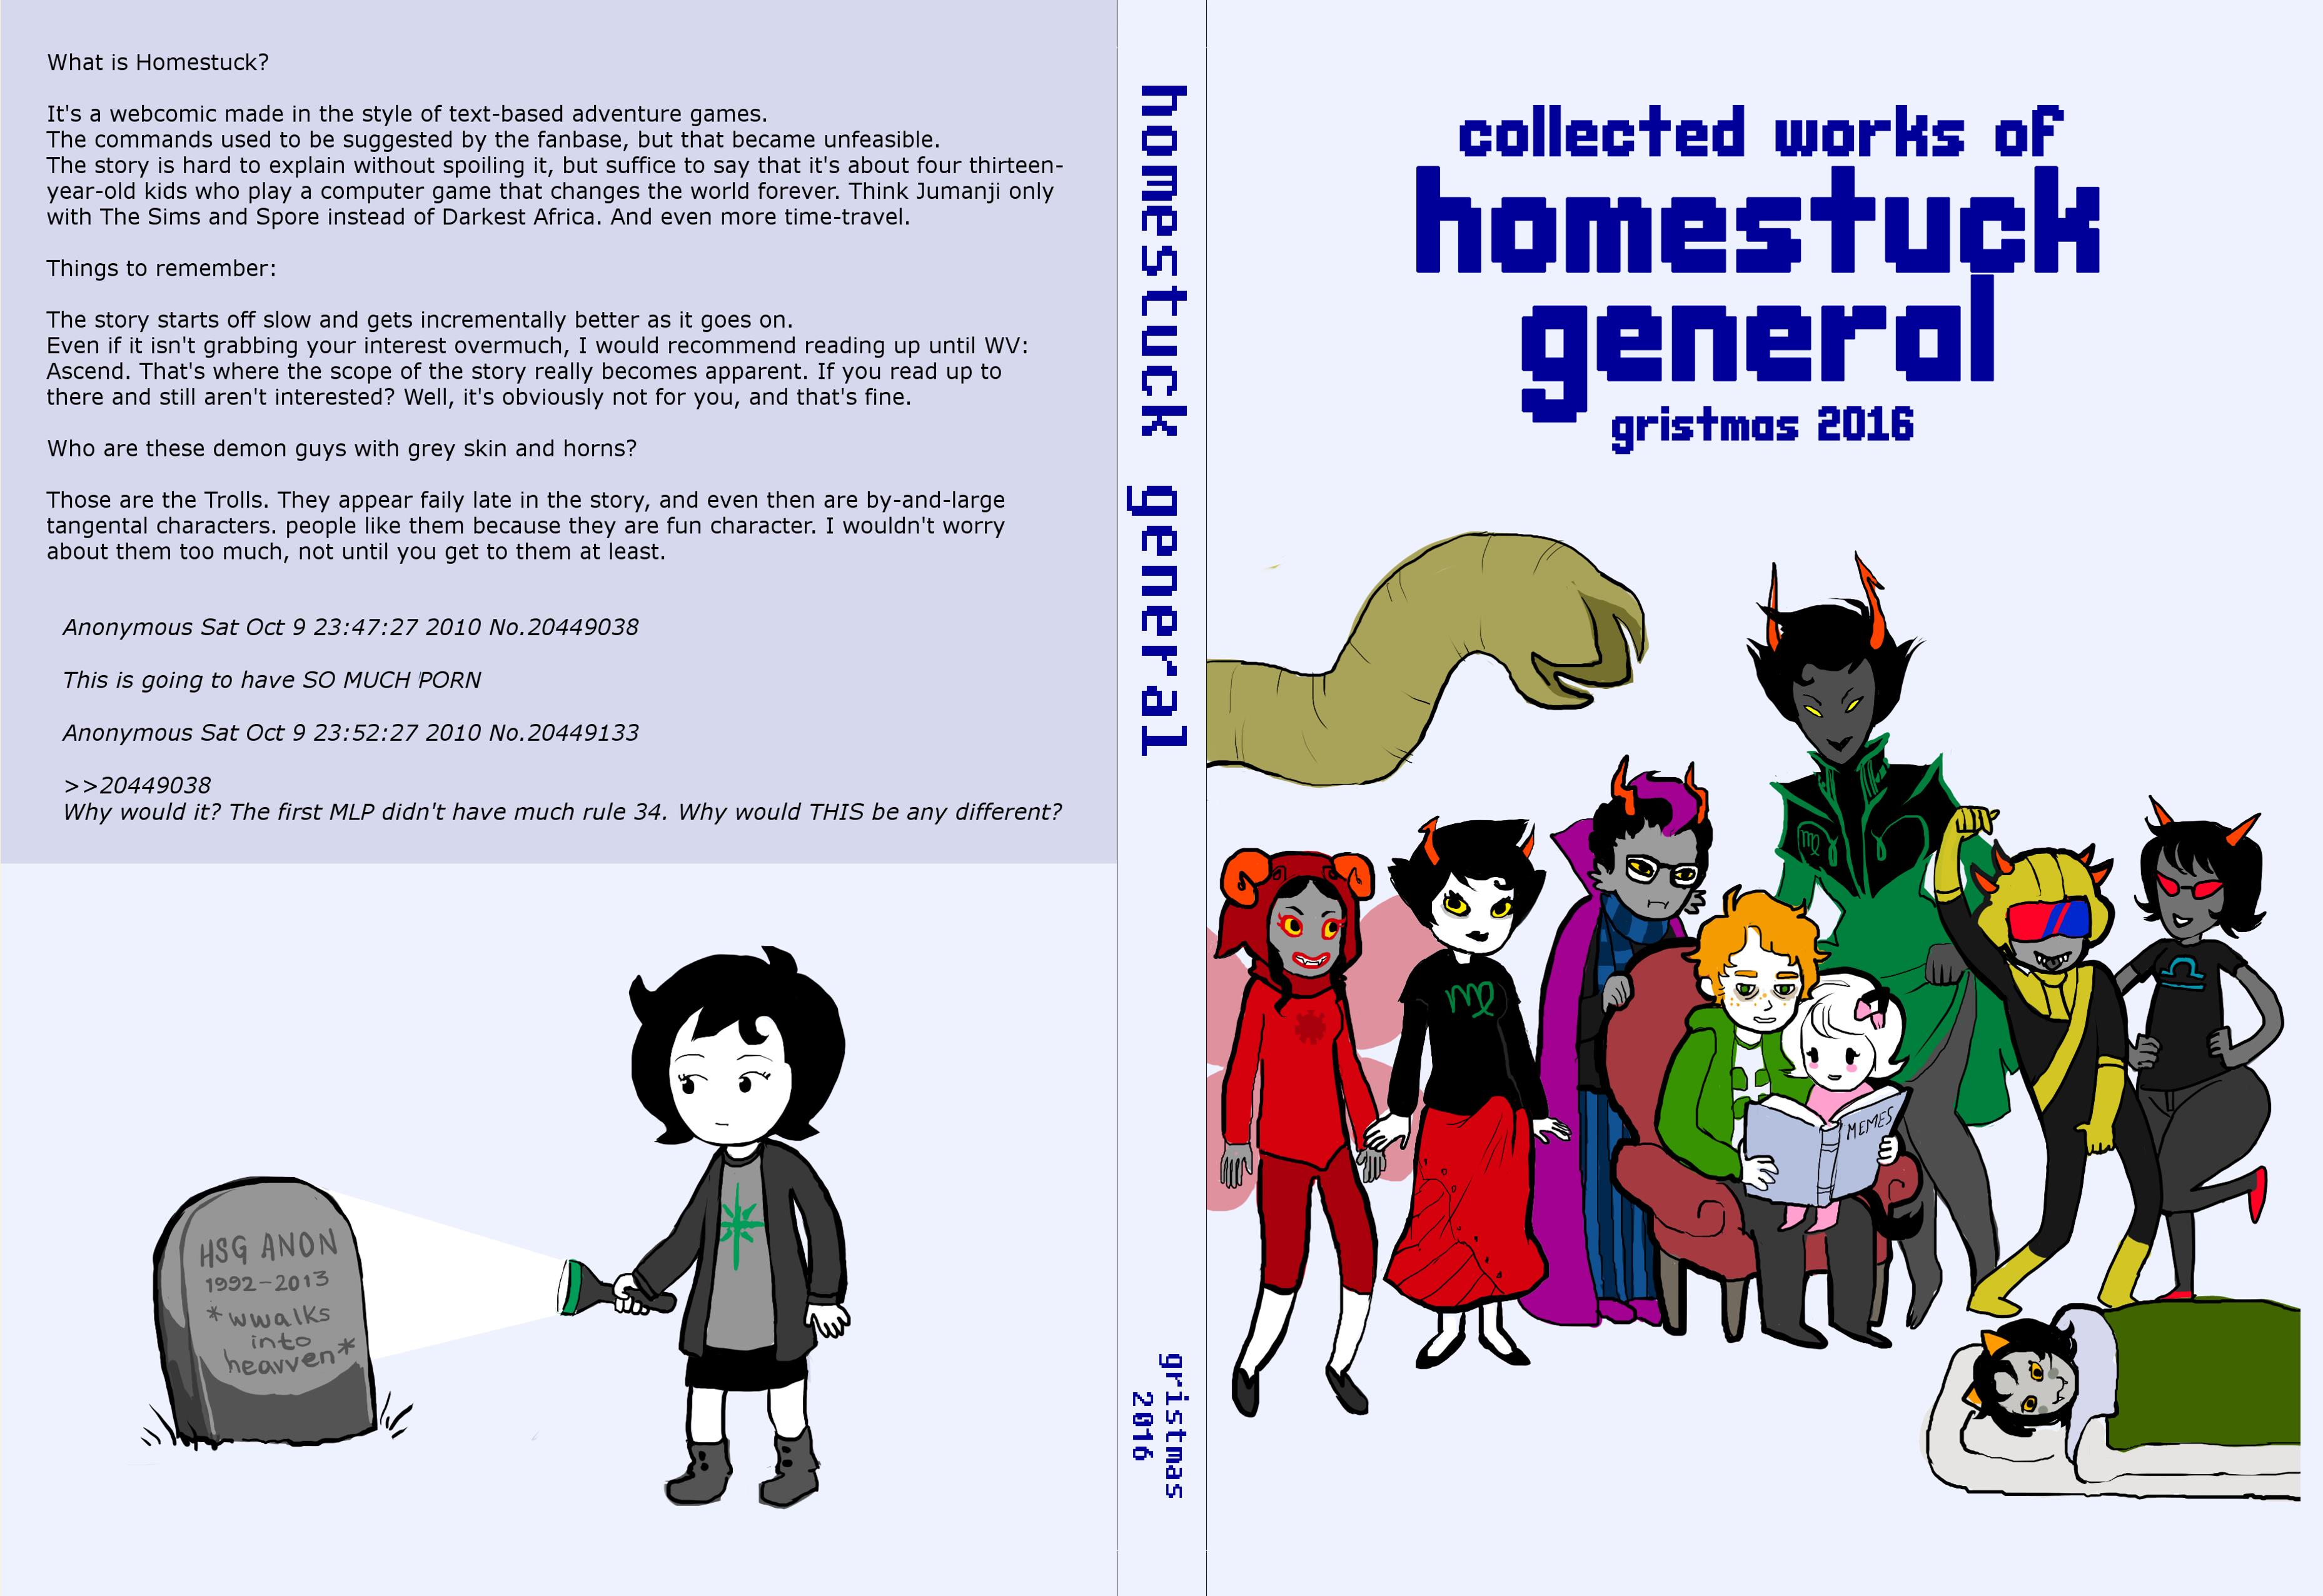 homestuck general - gristmas 2016 cover image